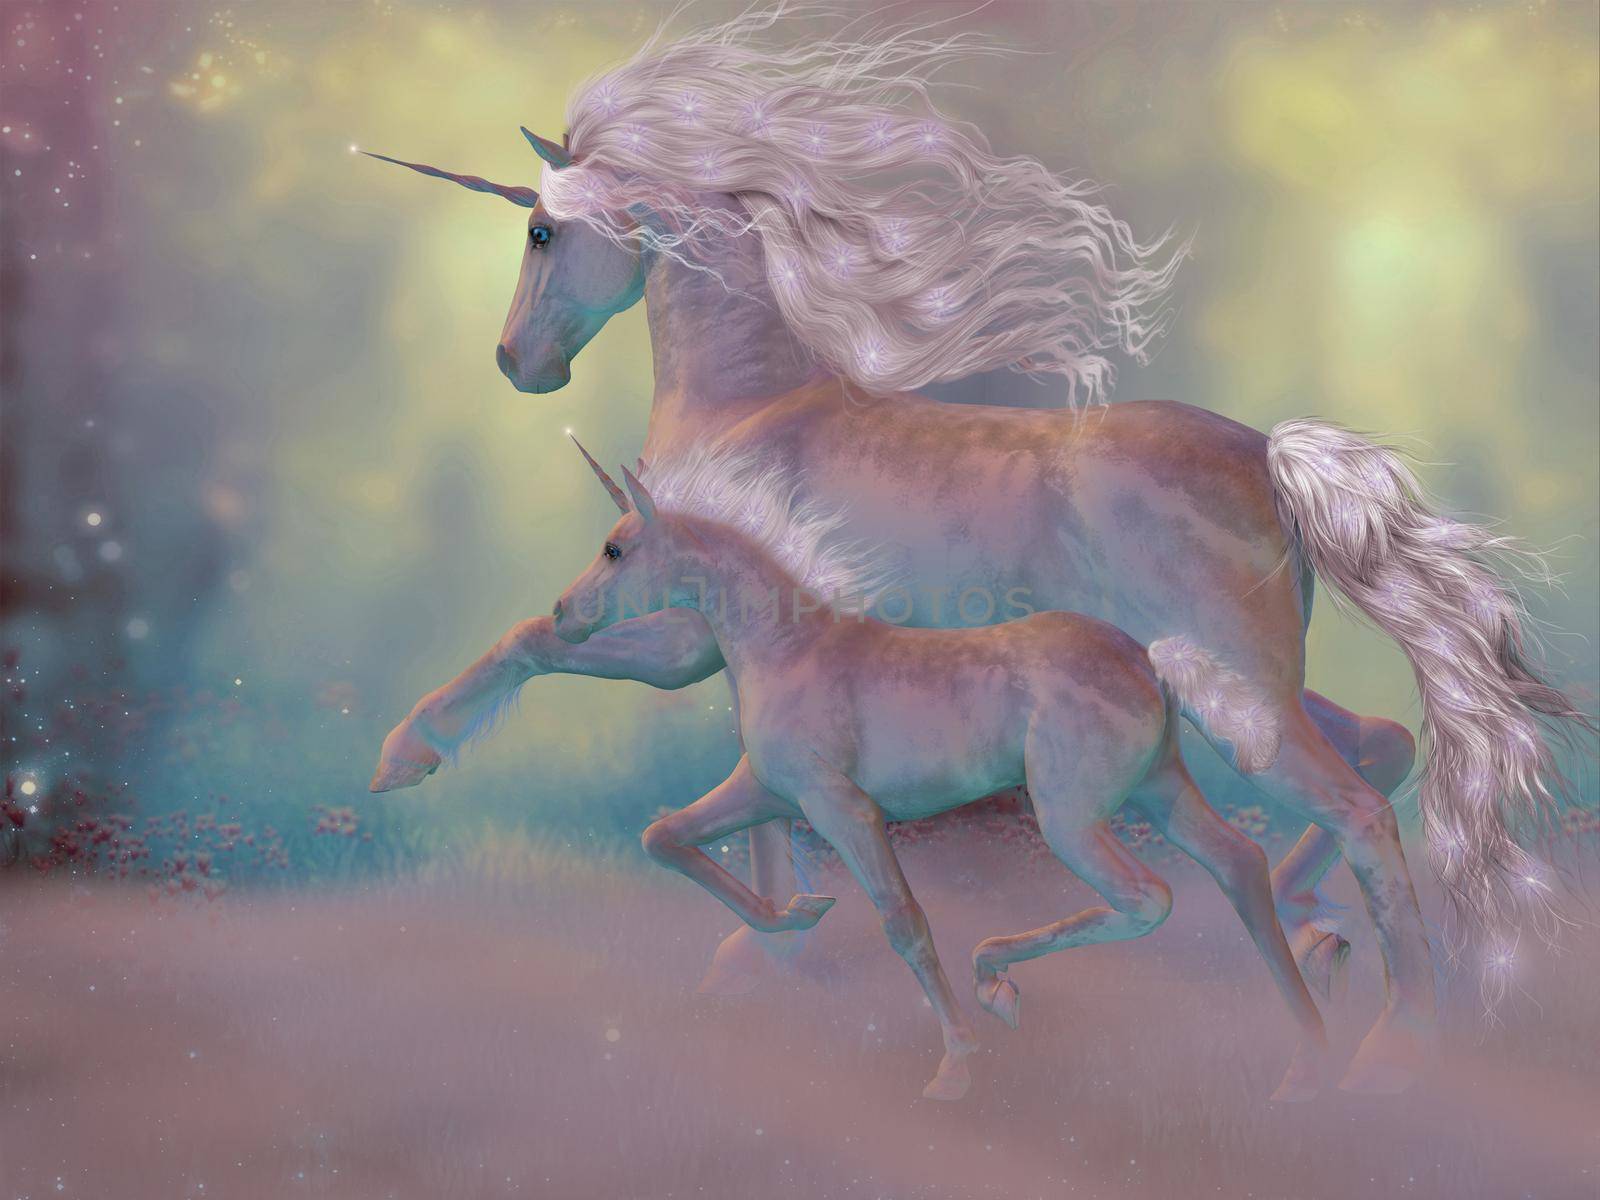 A unicorn is a legendary creature that inhabits magical forests and has a single horn on its forehead.